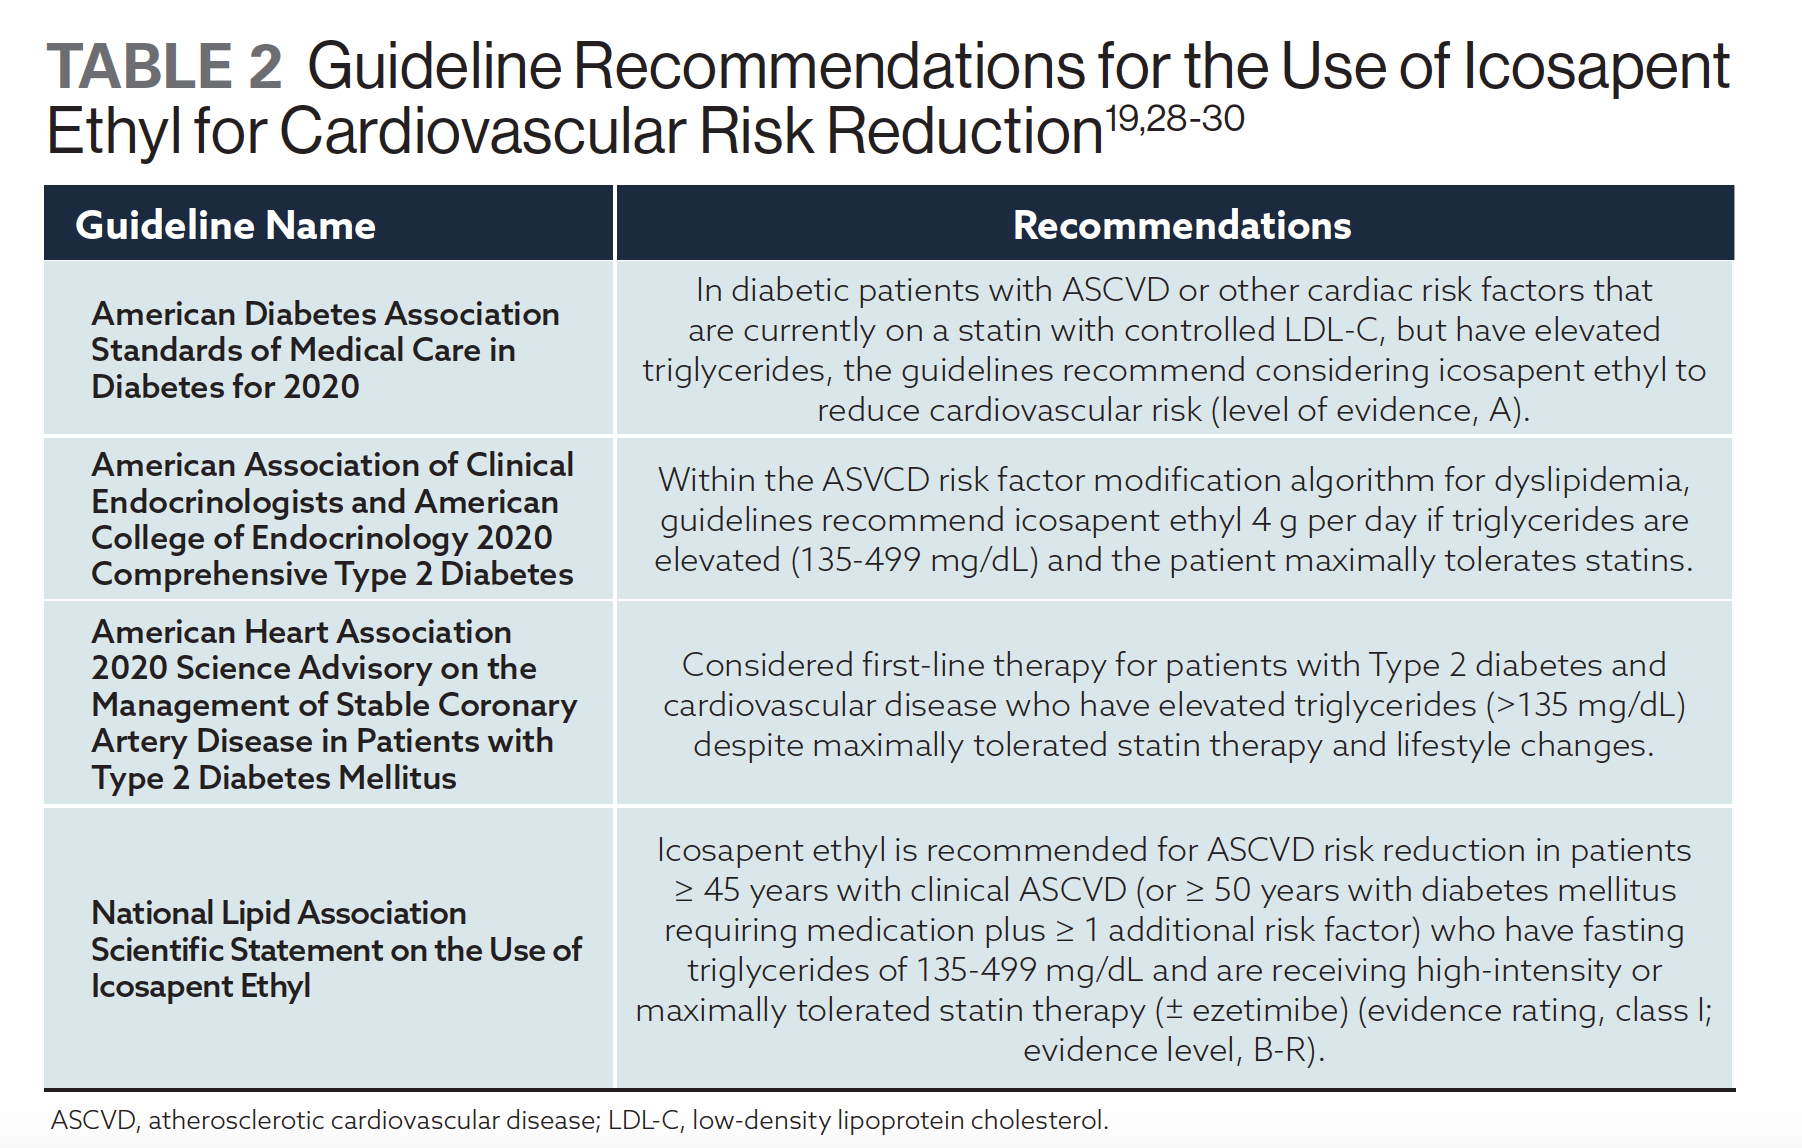 Guideline Recommendations for the Use of Icosapent Ethyl for Cardiovascular Risk Reduction